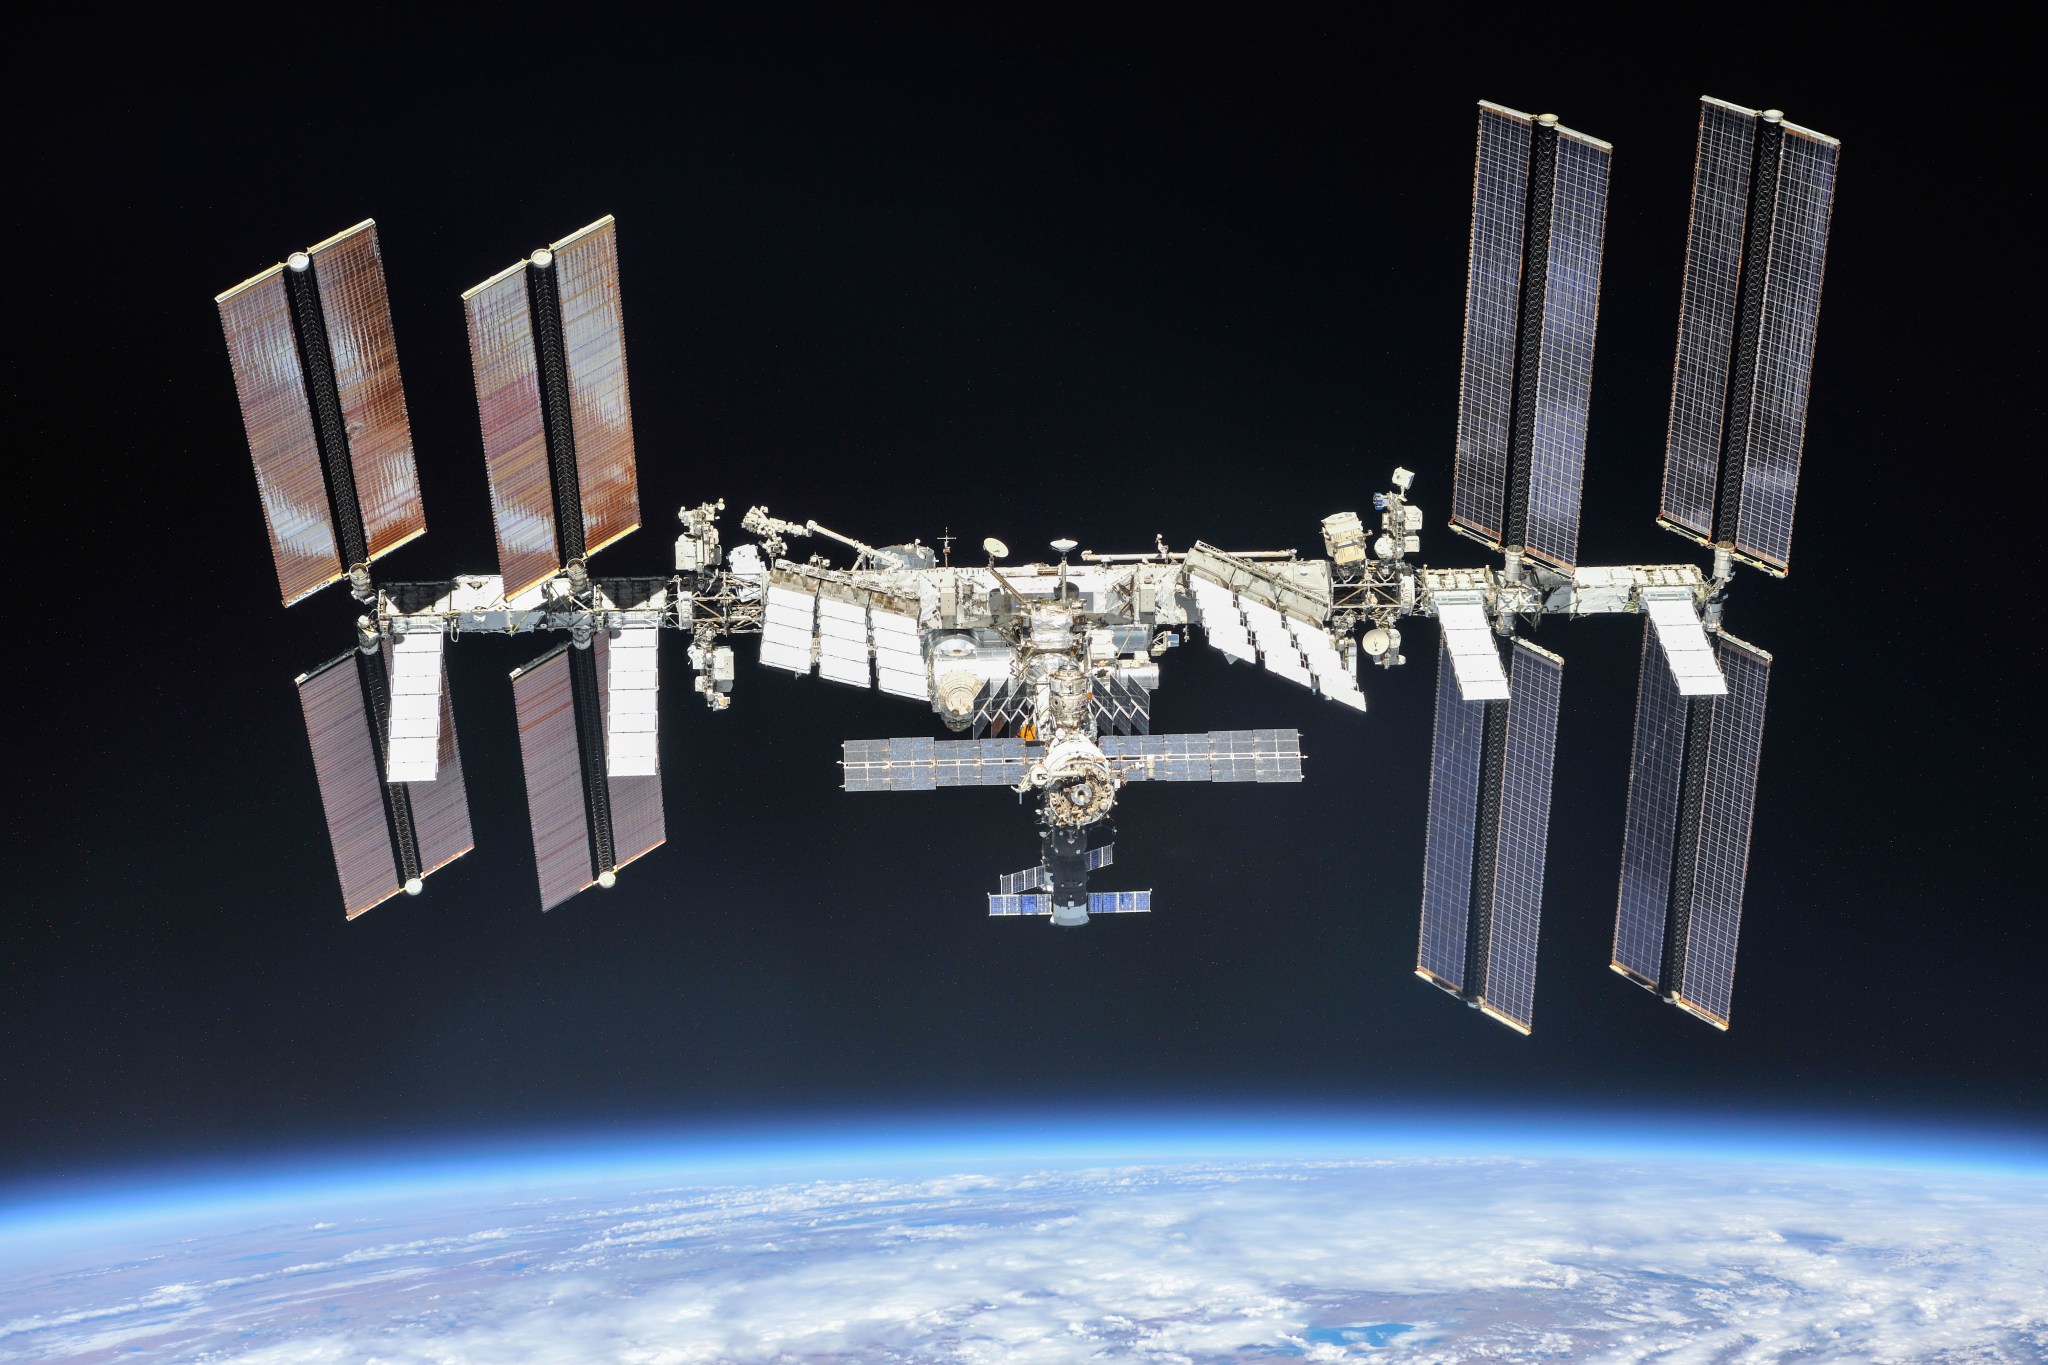 A photograph of the International Space Station.